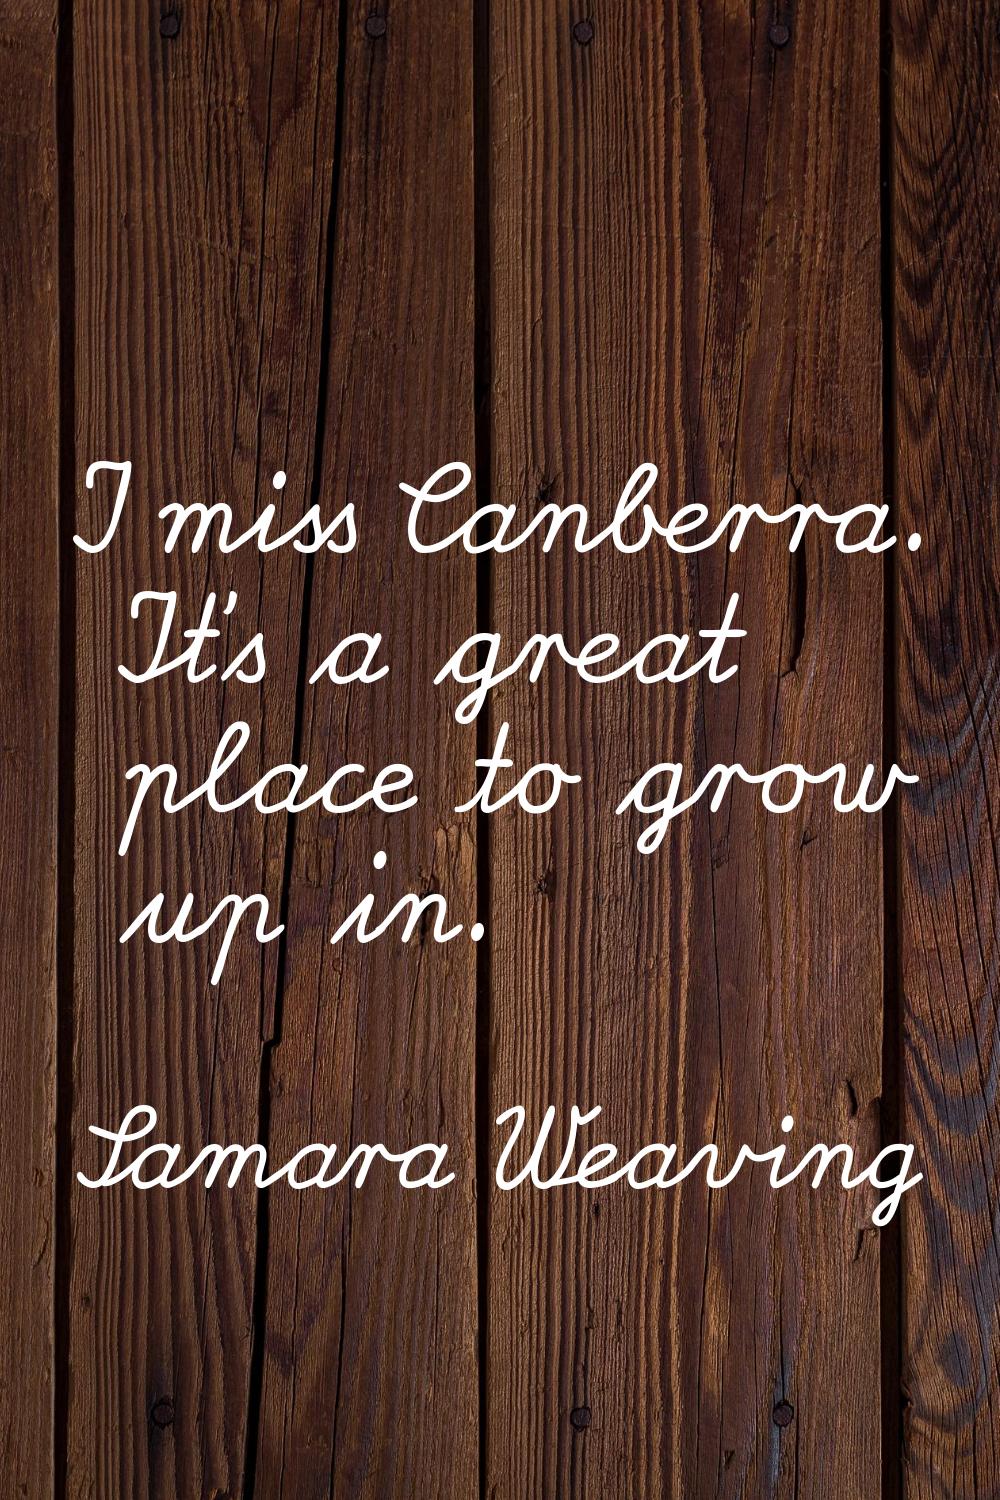 I miss Canberra. It's a great place to grow up in.